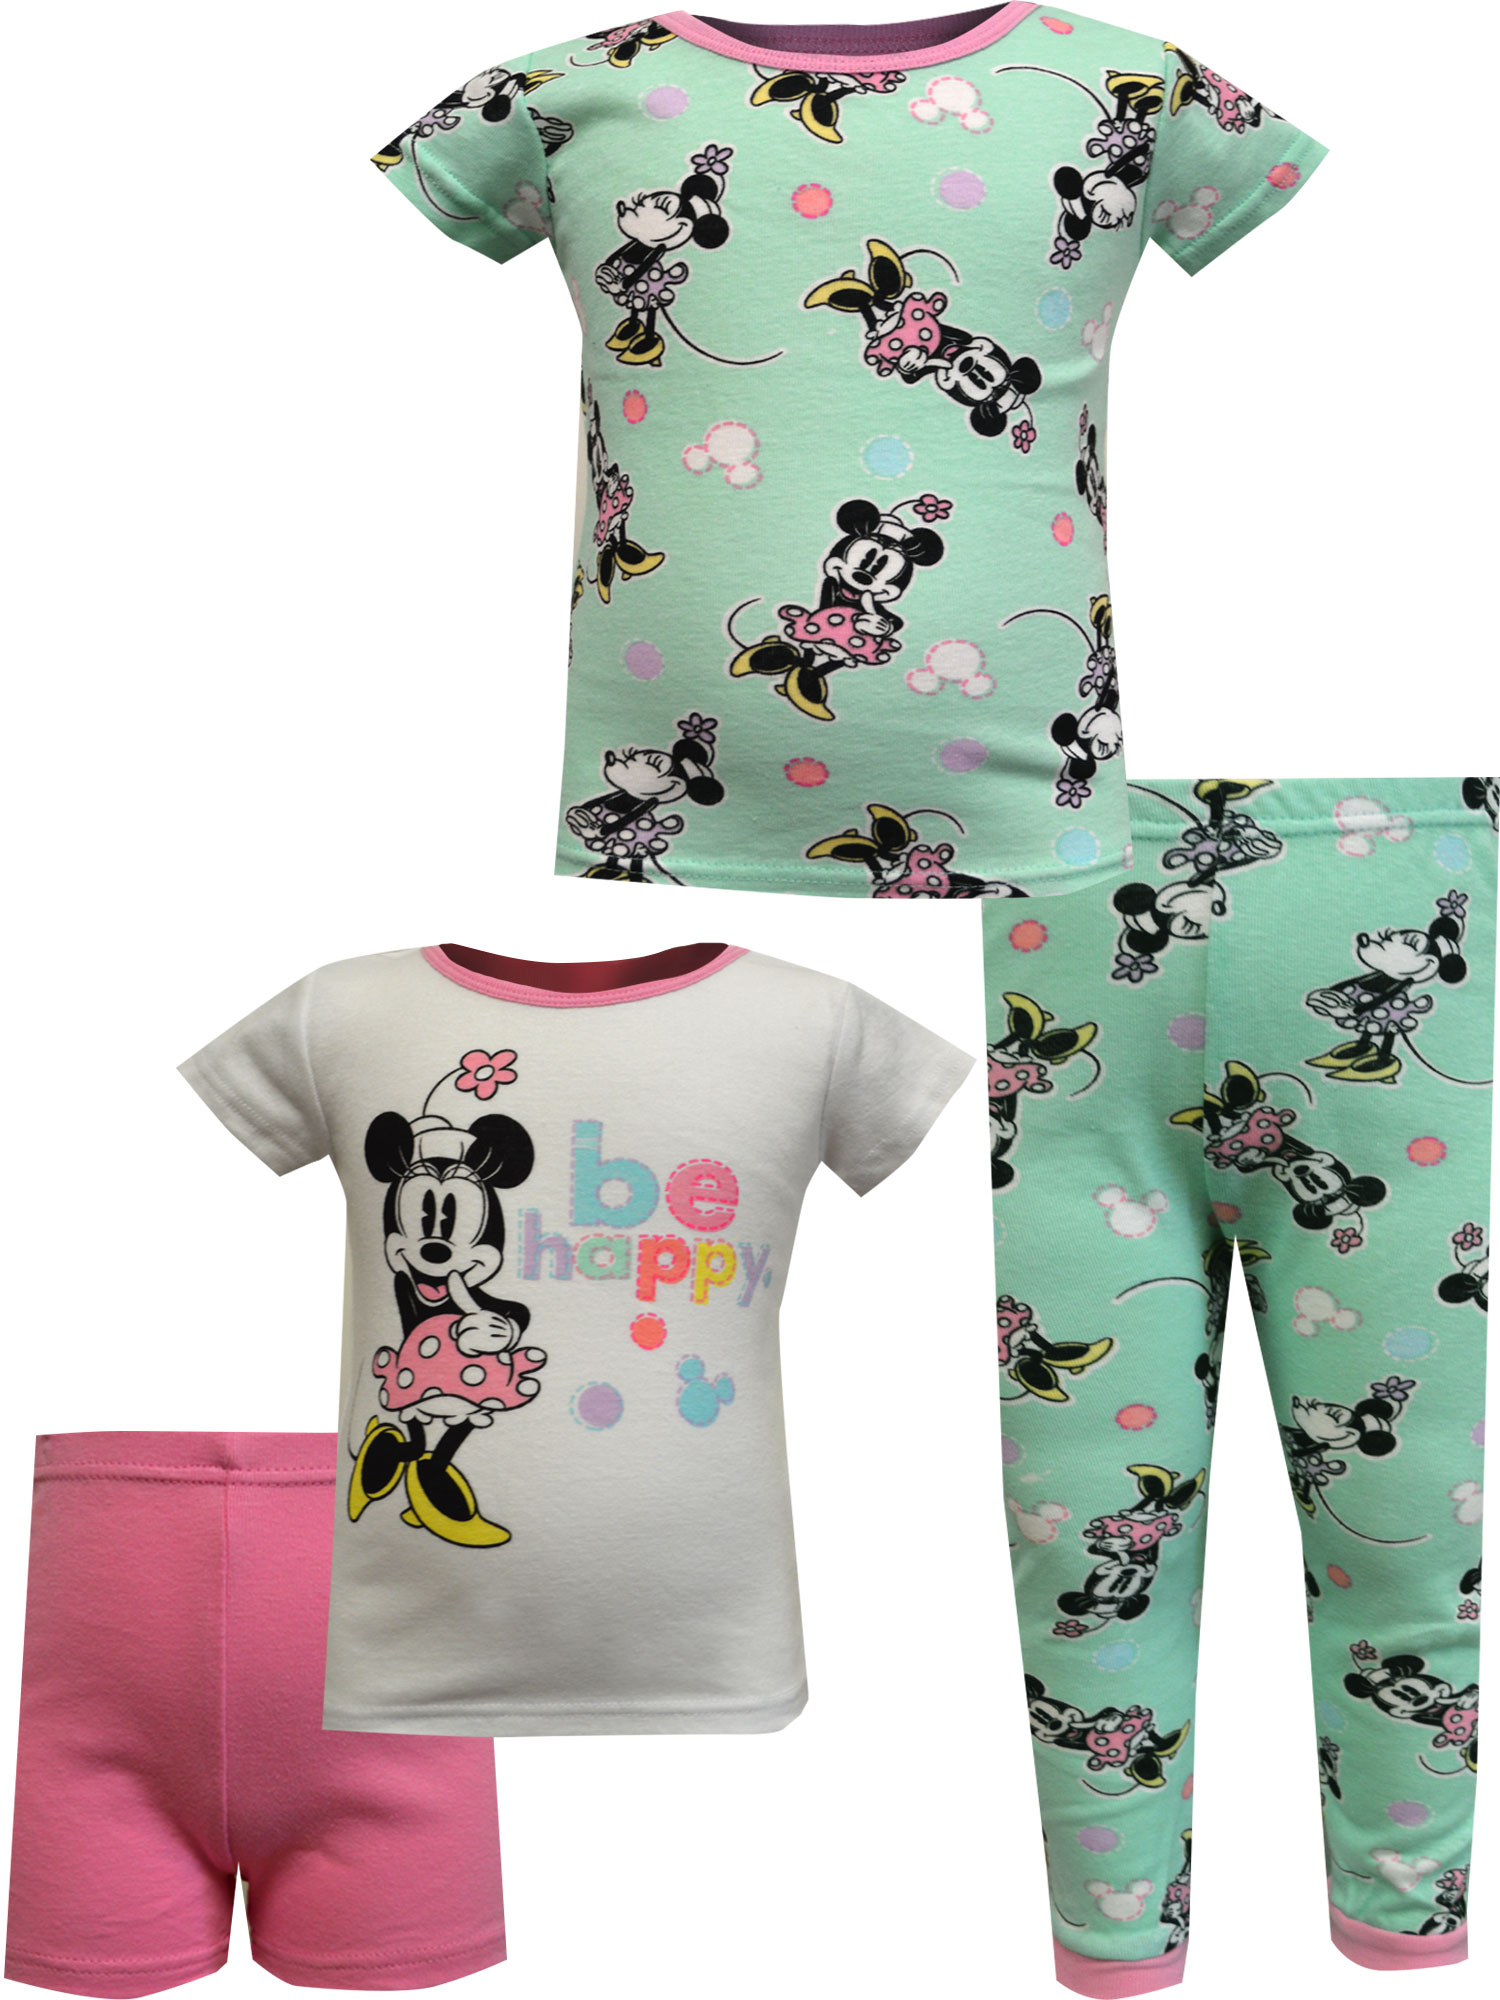 Favorite Characters Girls Disney Jr Minnie Mouse Be Happy 4 Pc Cotton Toddler Pajamas (2T) - image 1 of 1